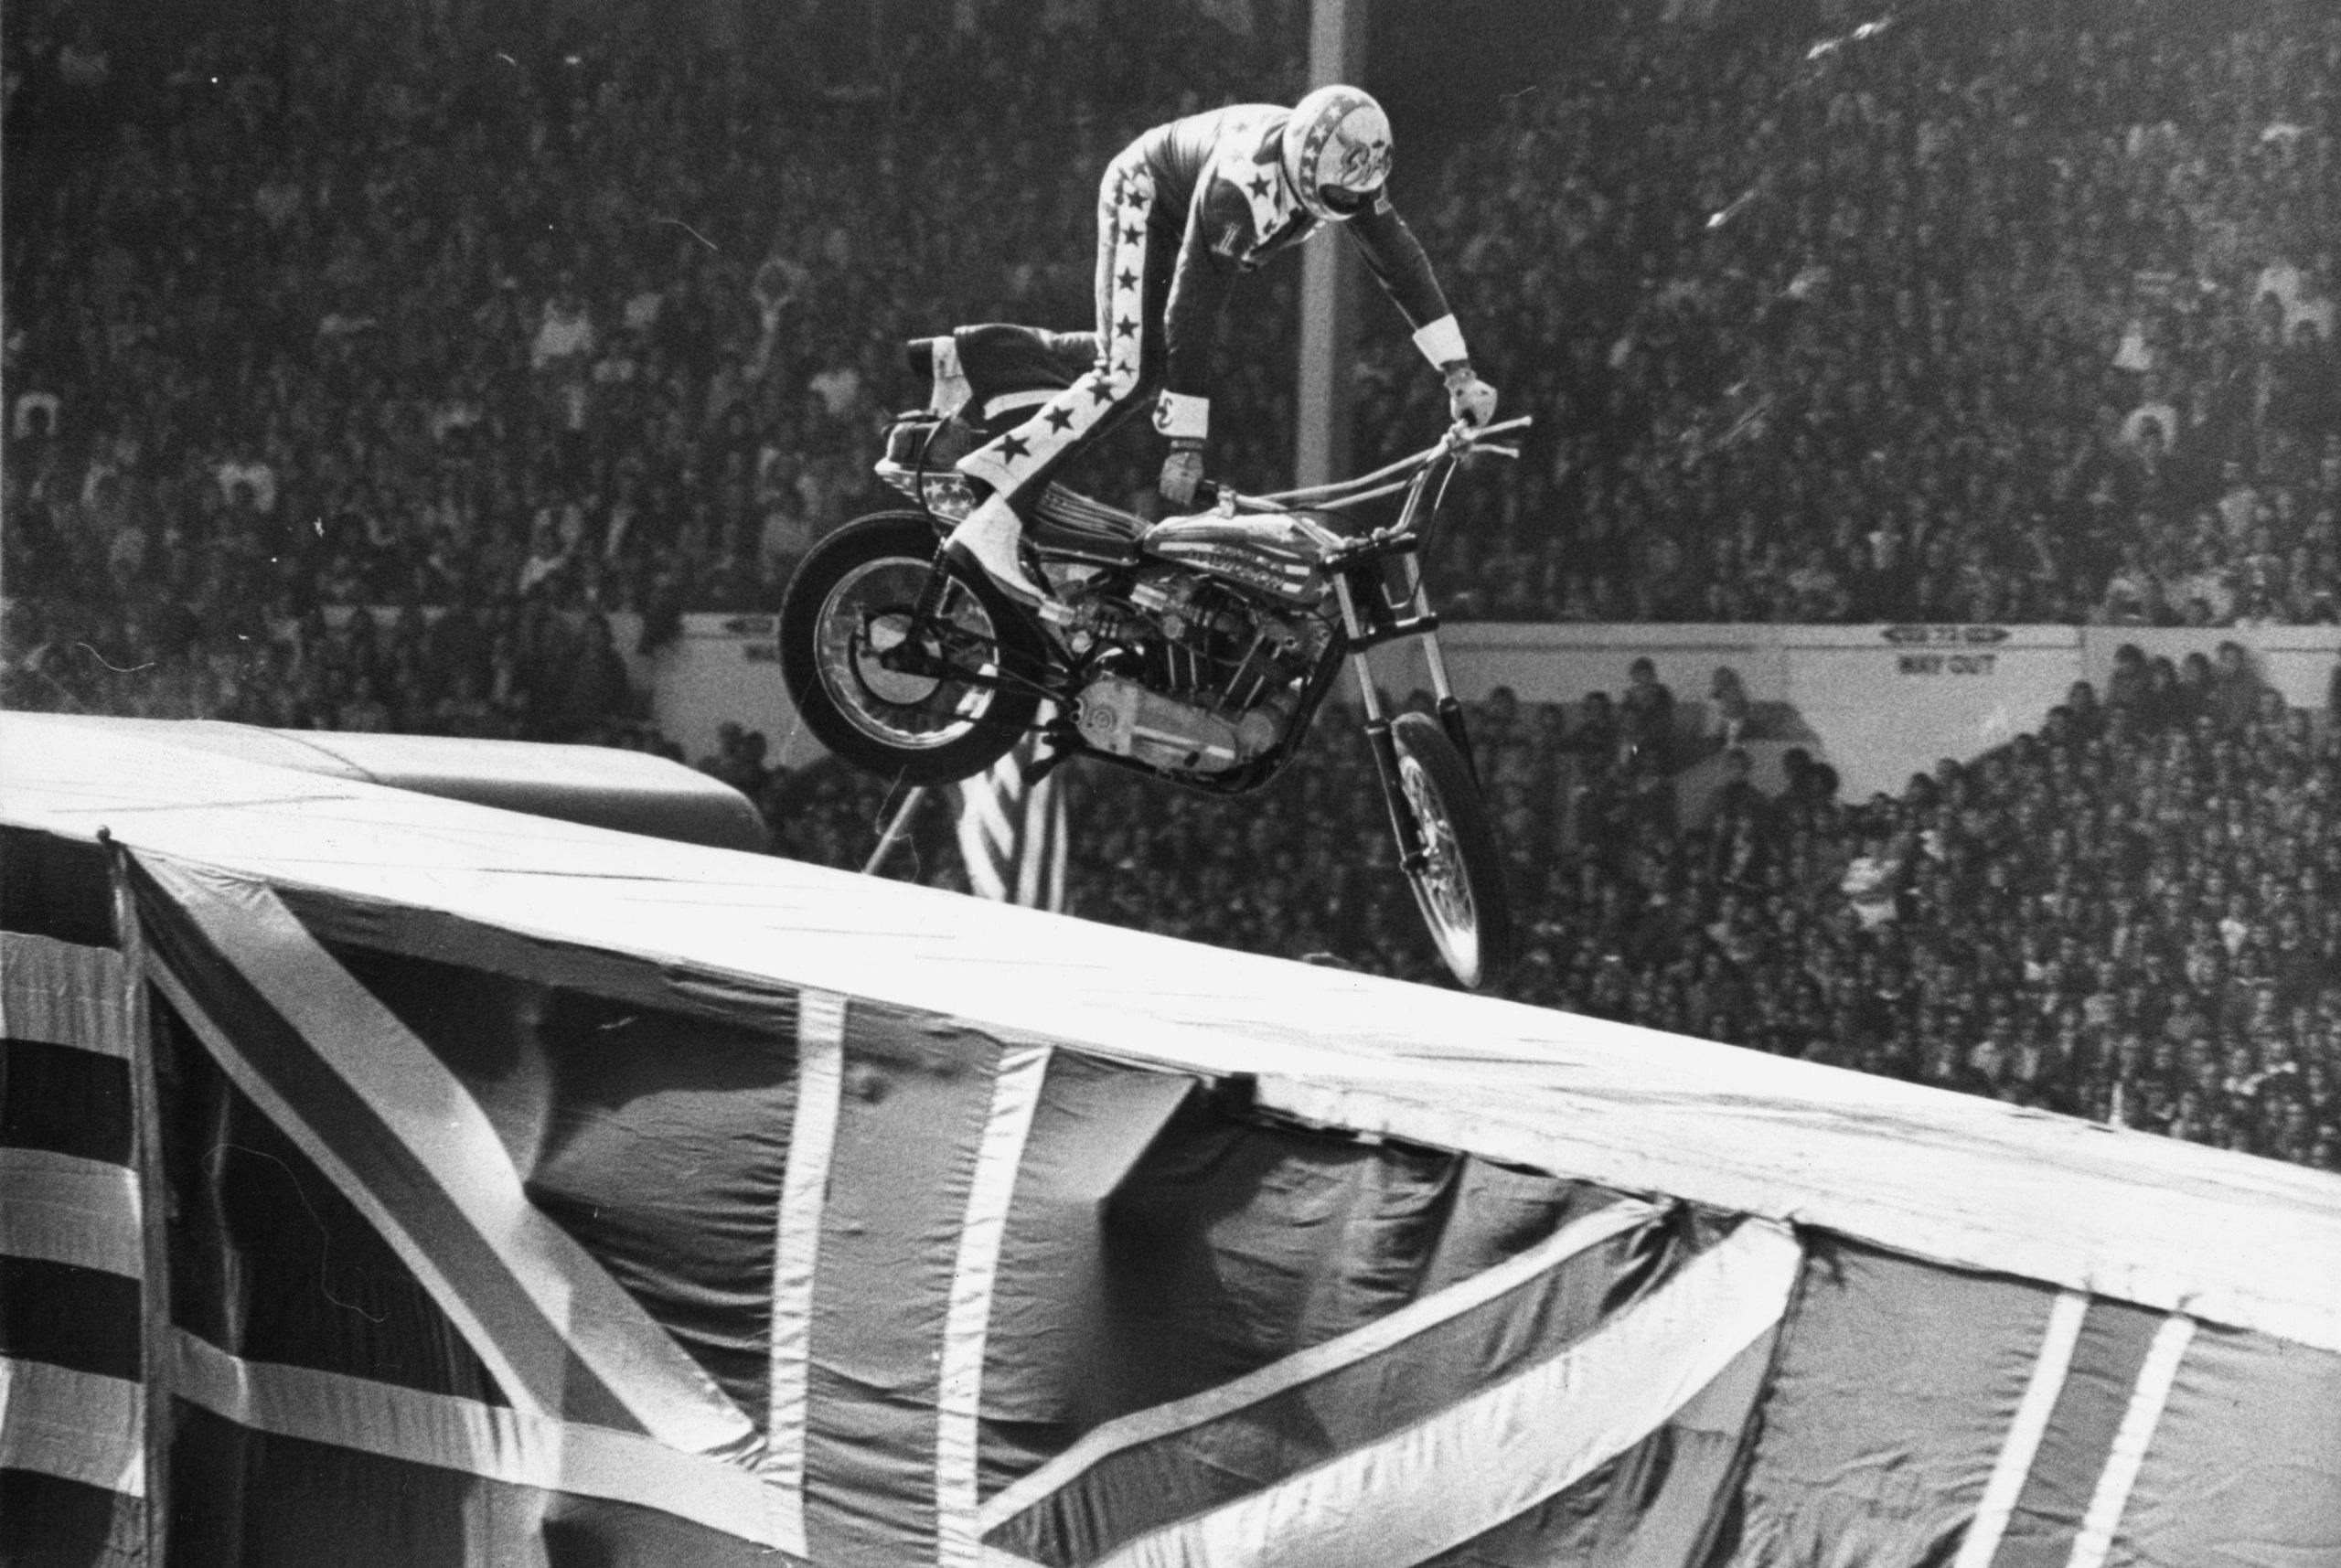 Evel Knievel Landing off his Motorcycle Wembley